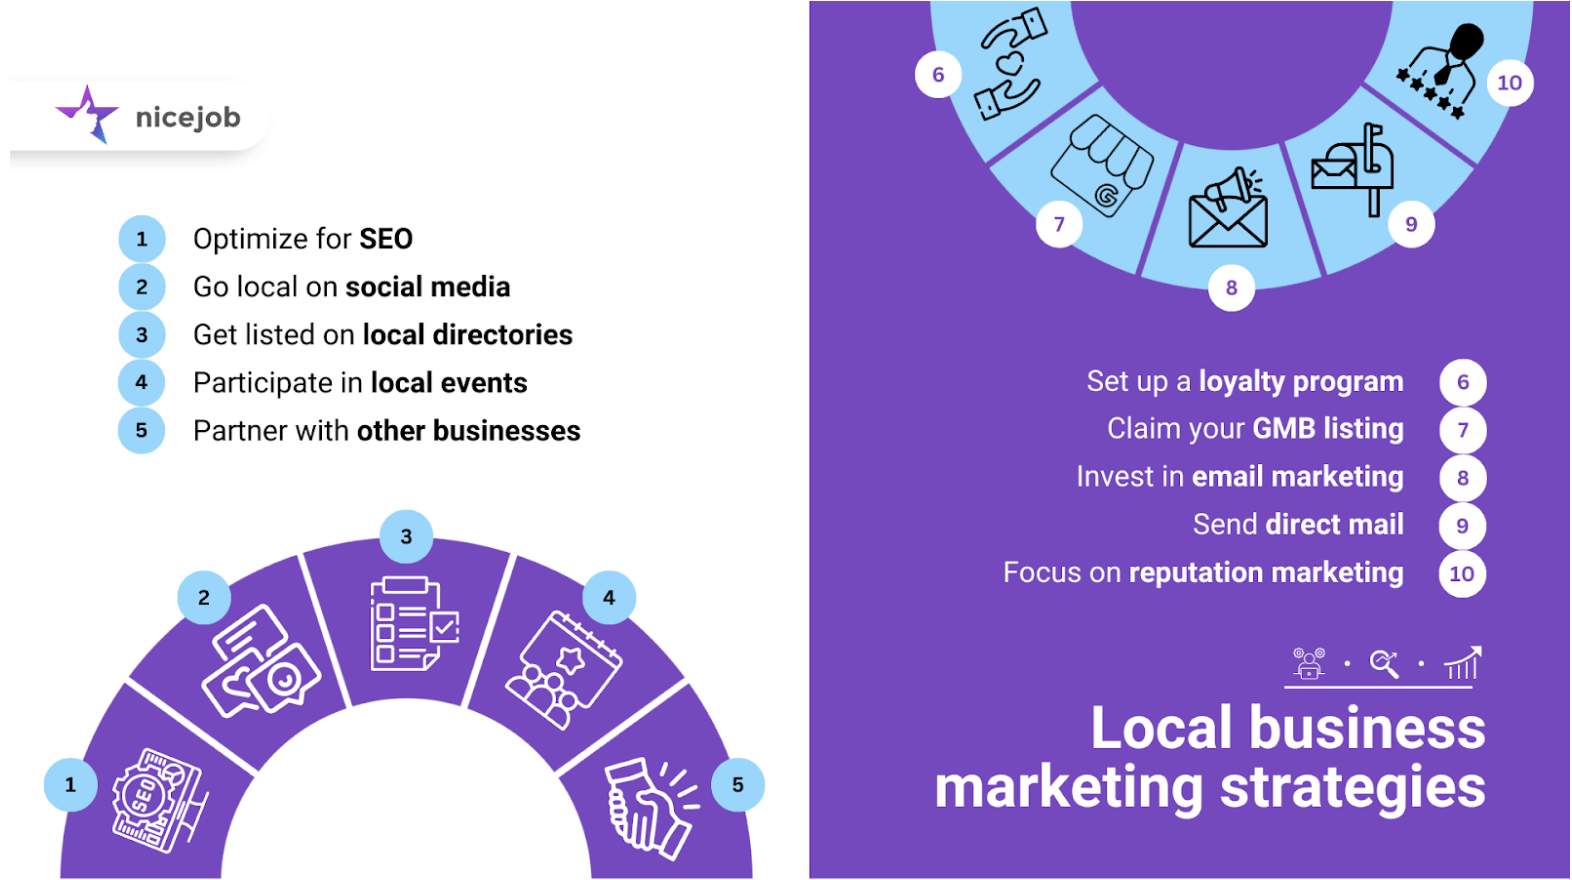 Infographic with a numbered list of ten local marketing strategies for small businesses.